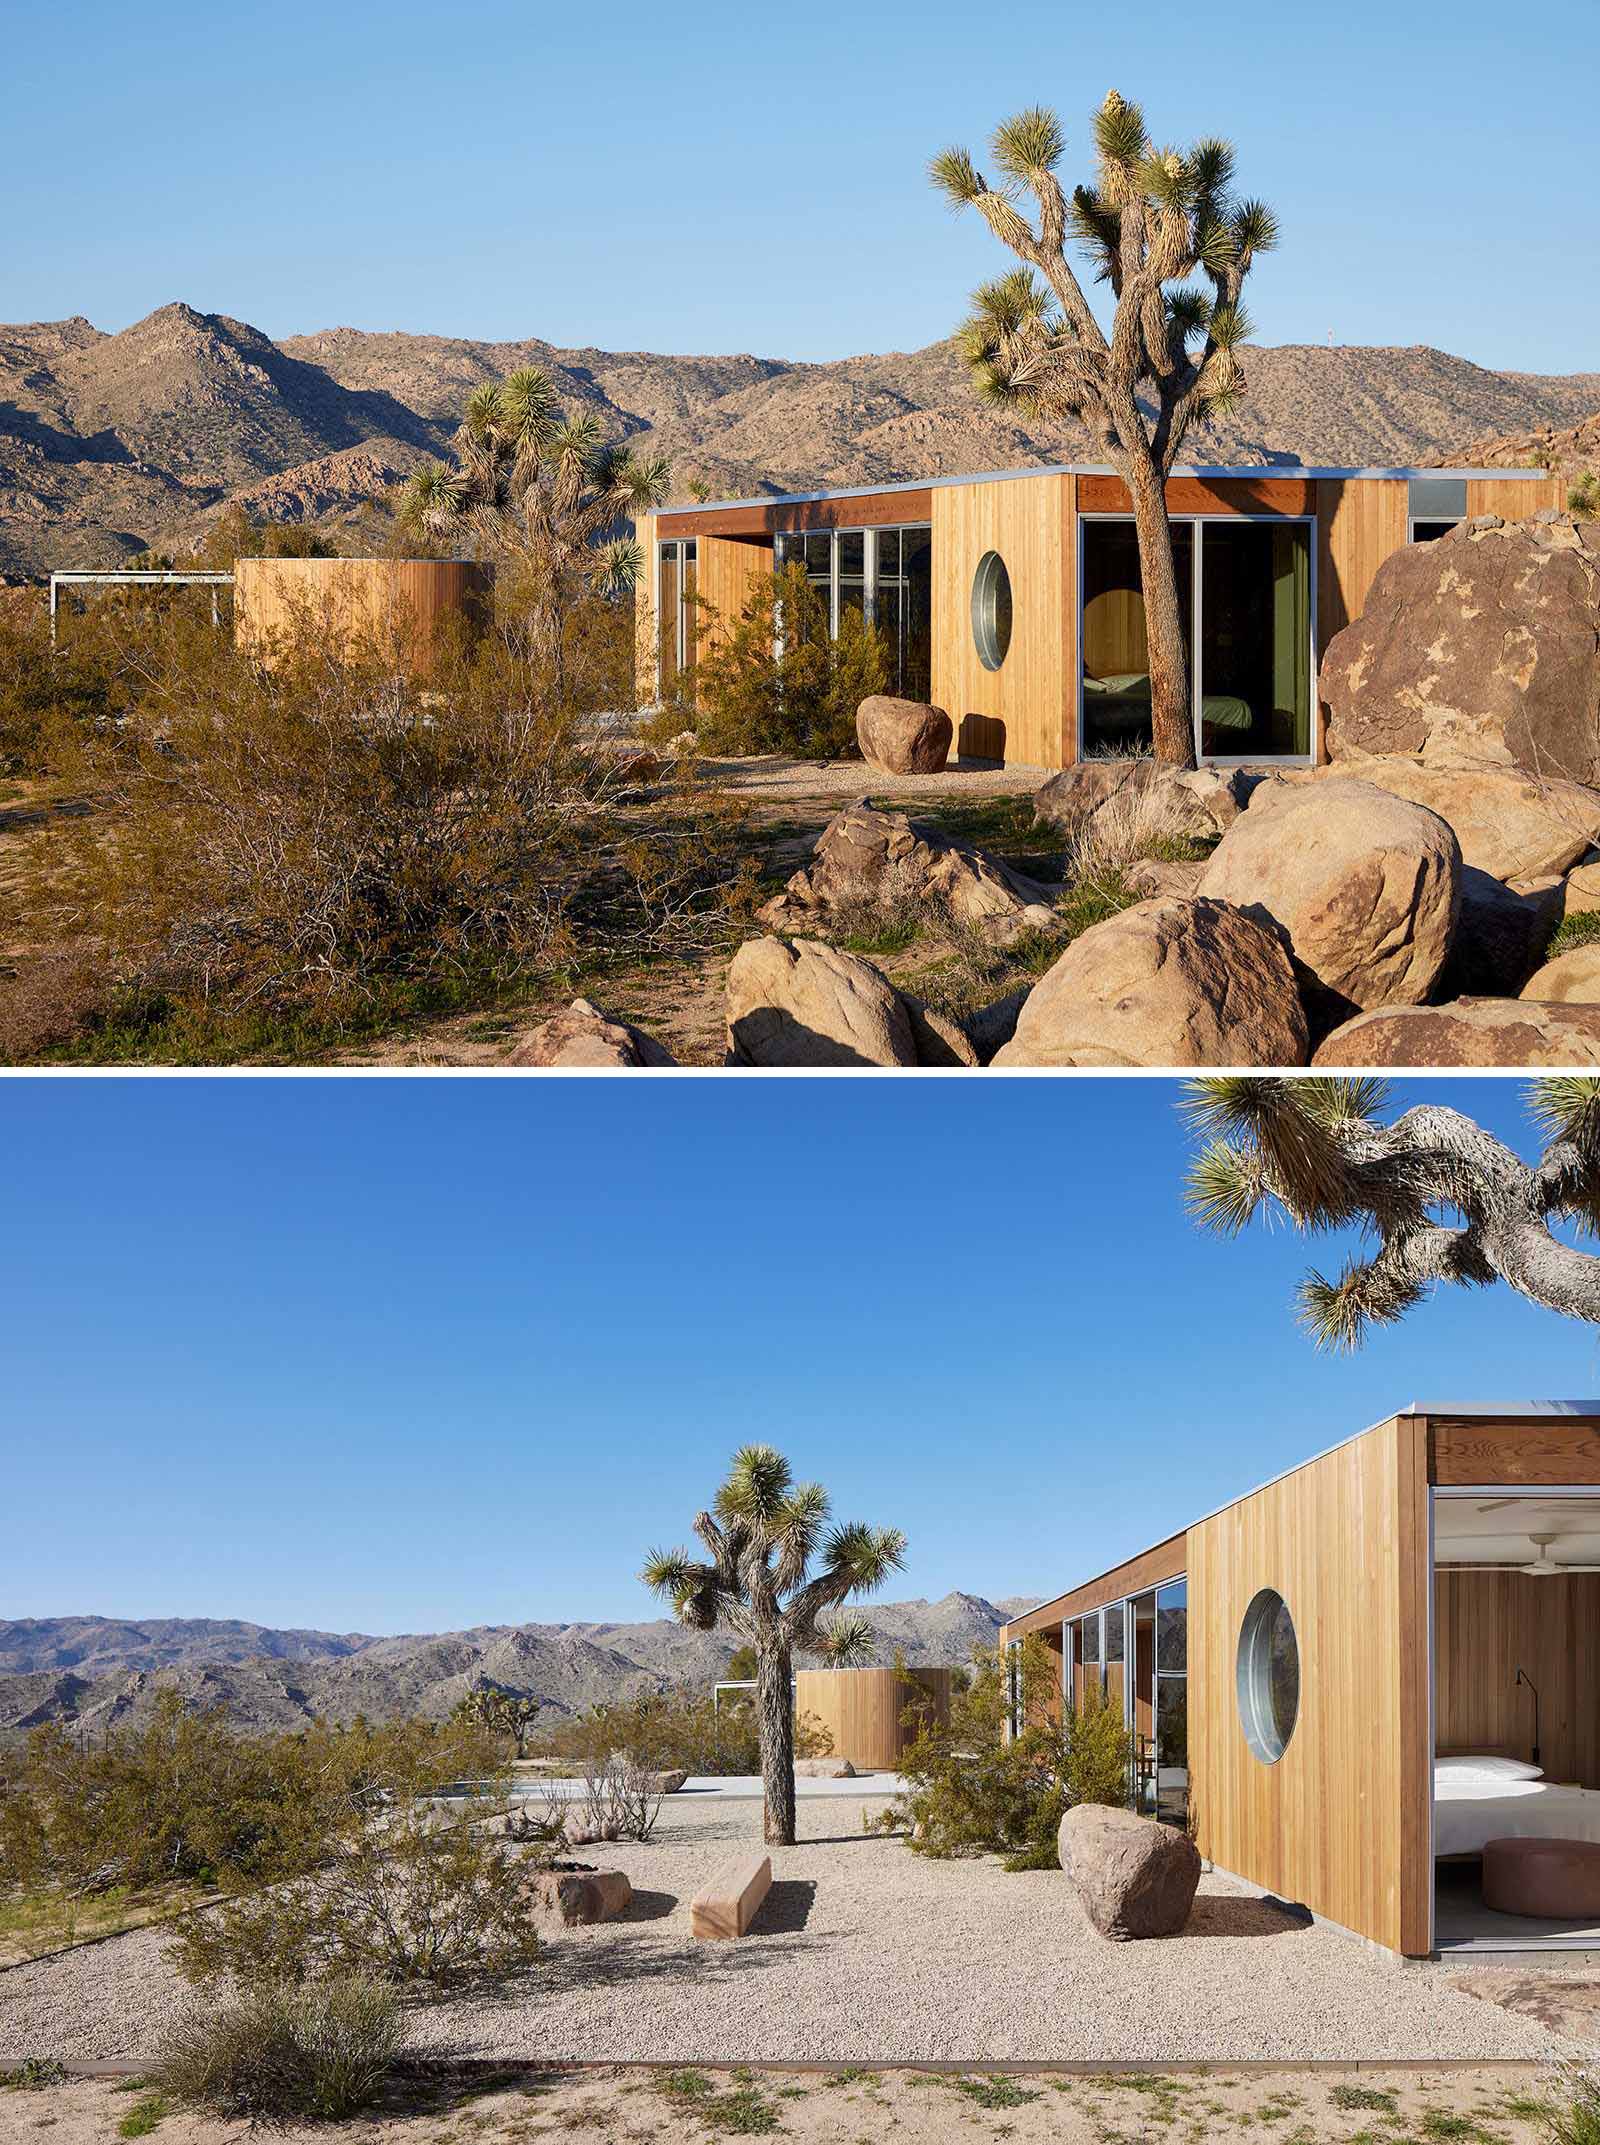 A desert home with wood siding that blends into its surrounding.